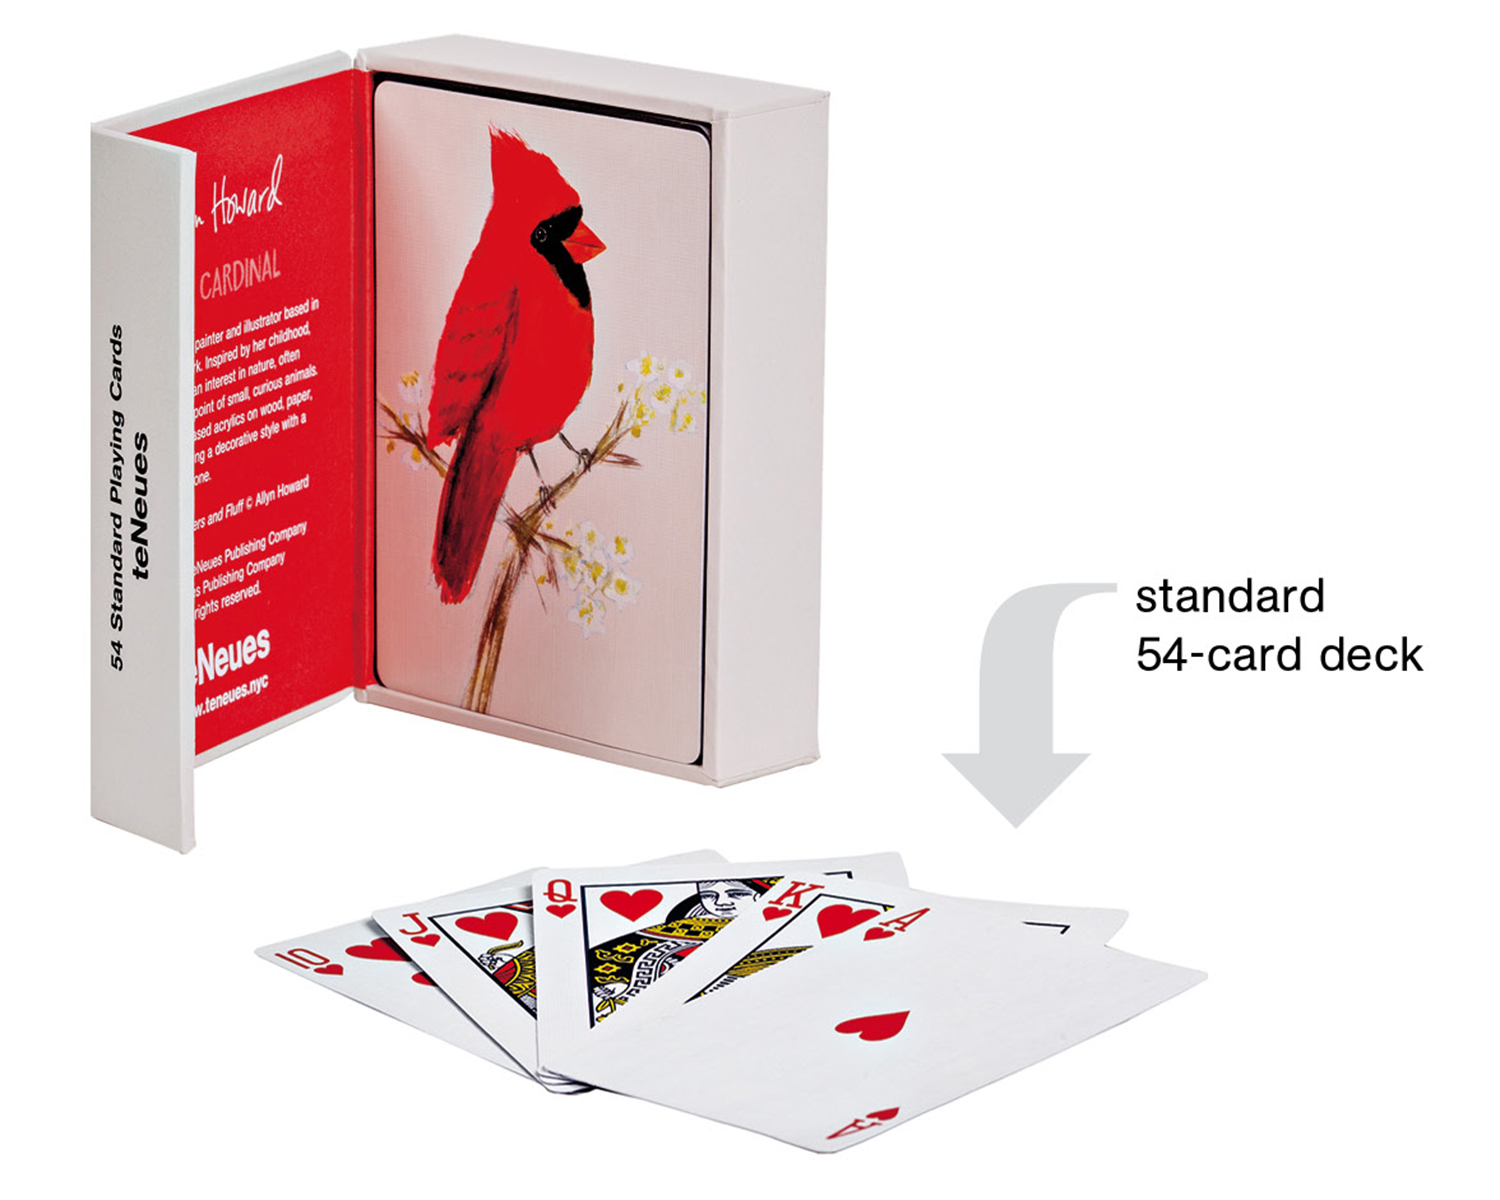 Print of Red Cardinal bird by Allyn Howard, on playing card box, by teNeues stationery.